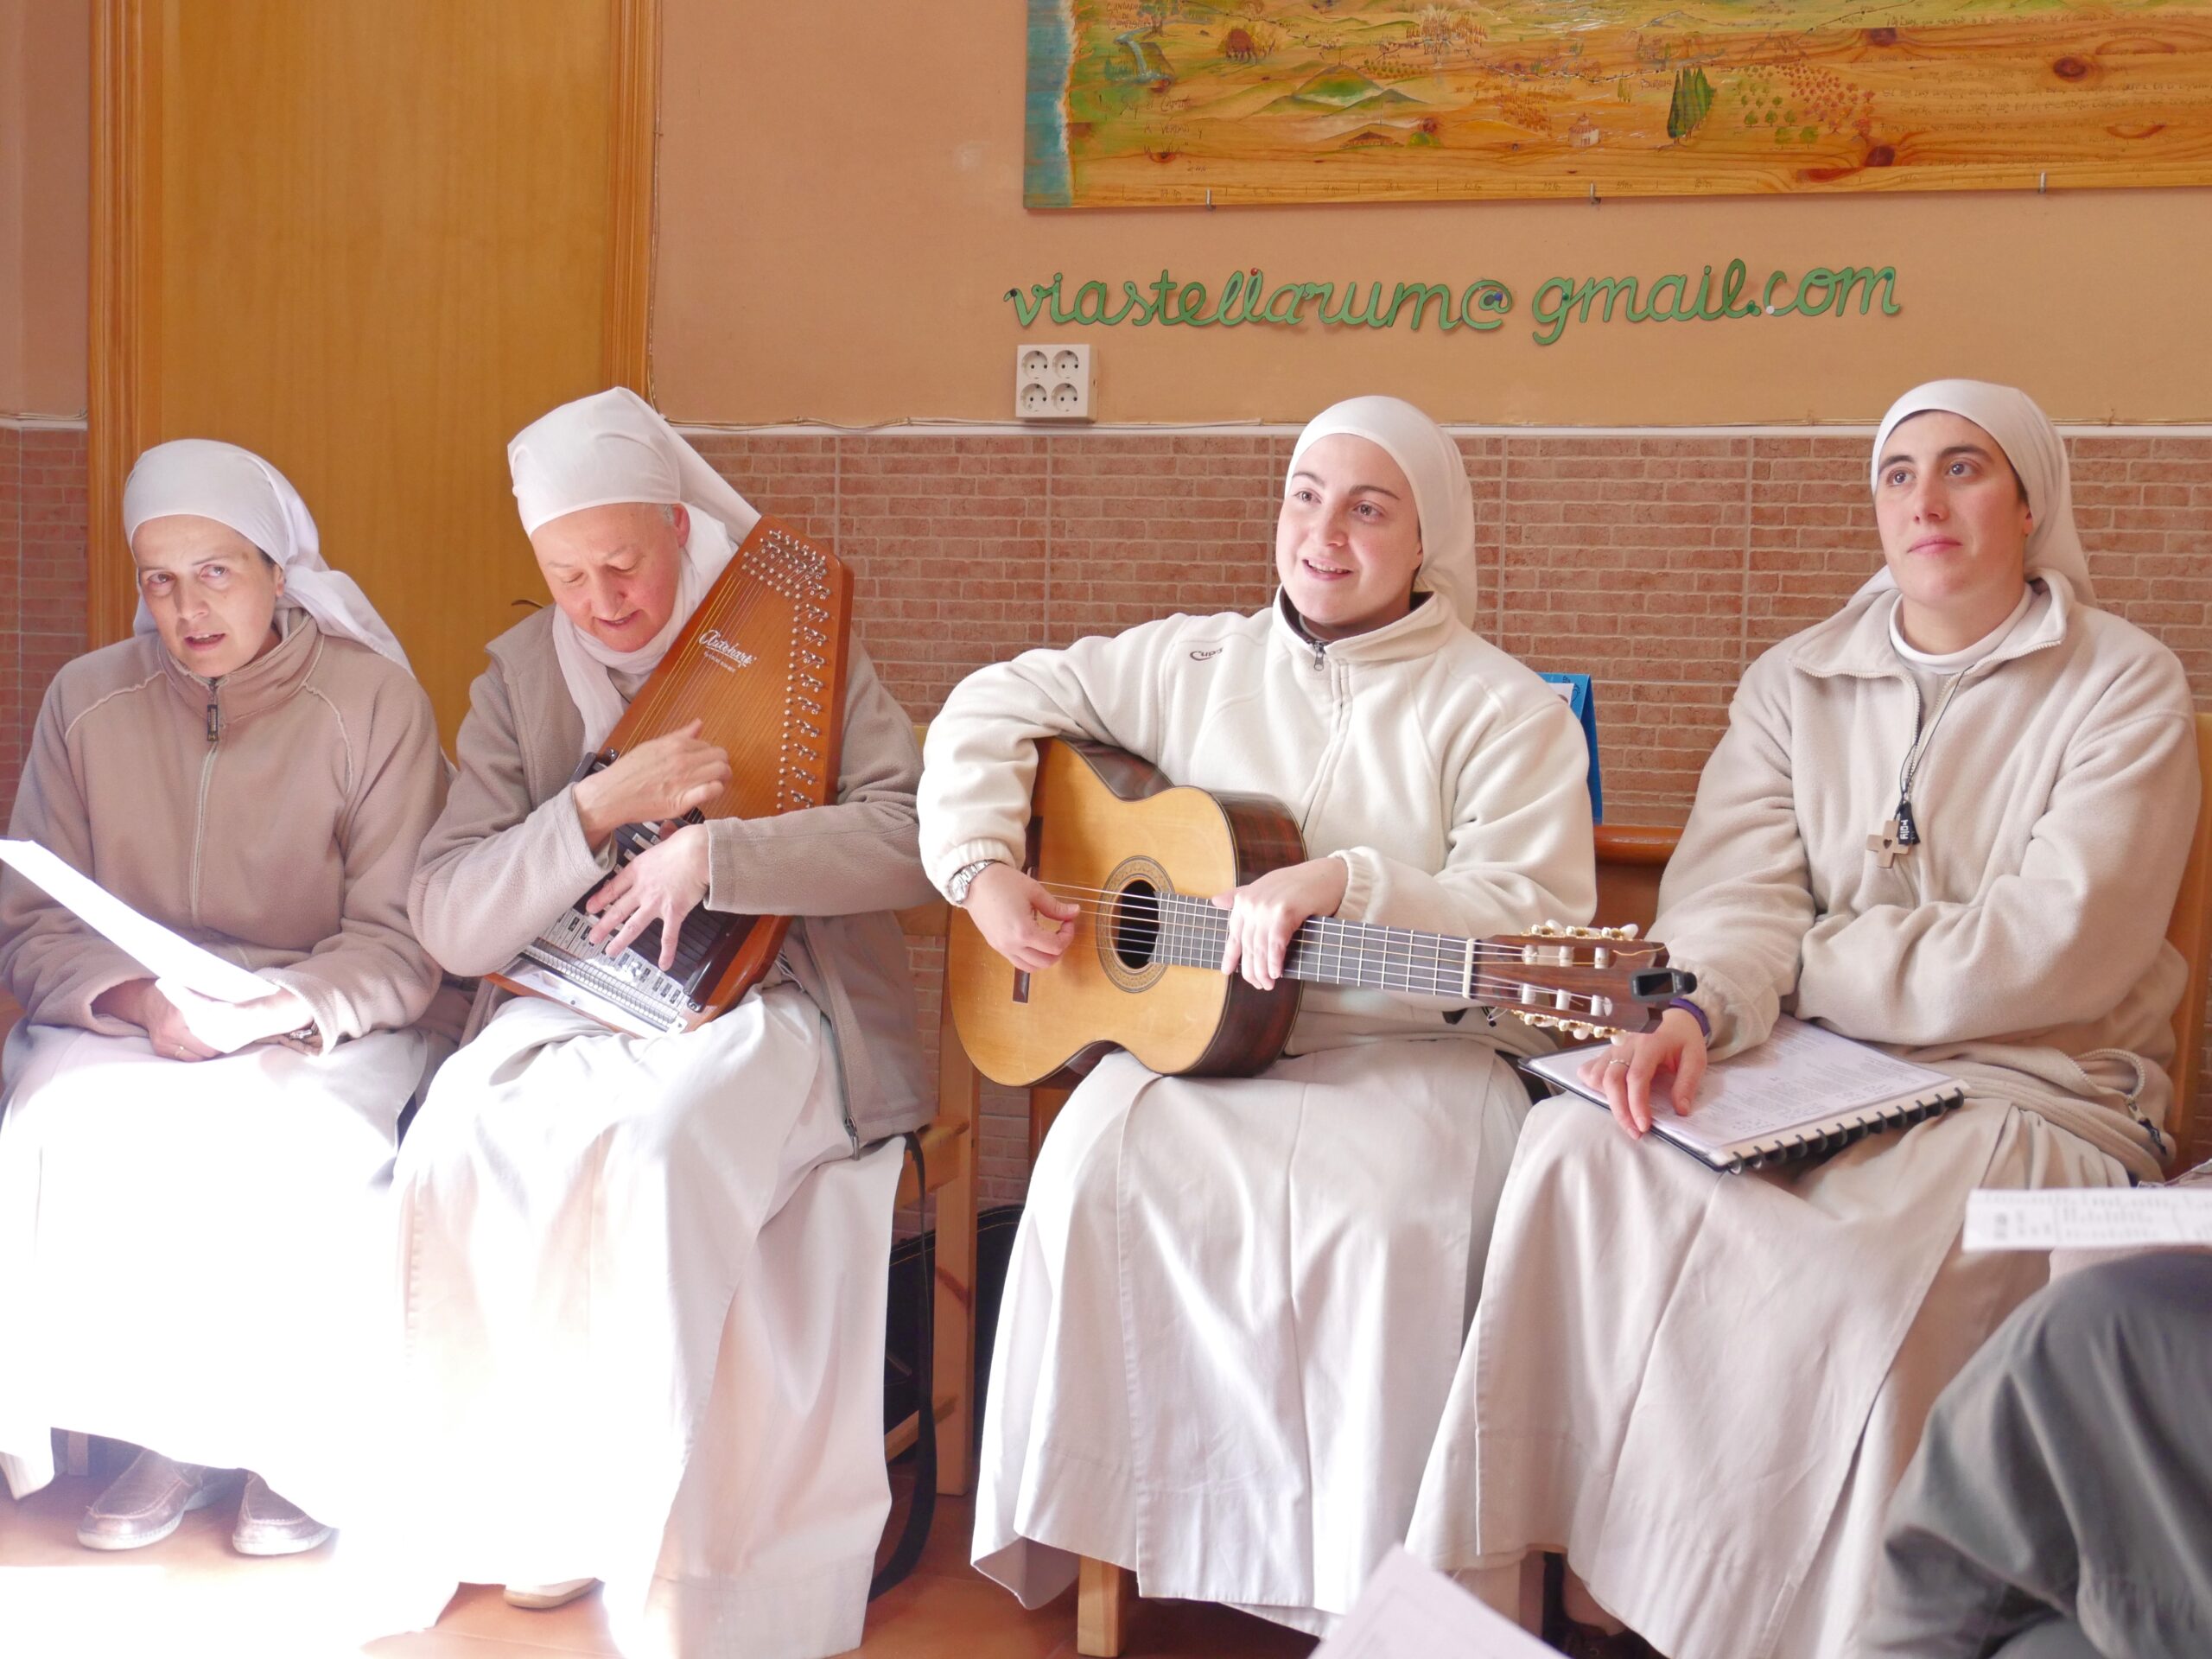 Four nuns sing in the entrance hall of the albergue in Carri&oacute;n de los Condes, Spain.